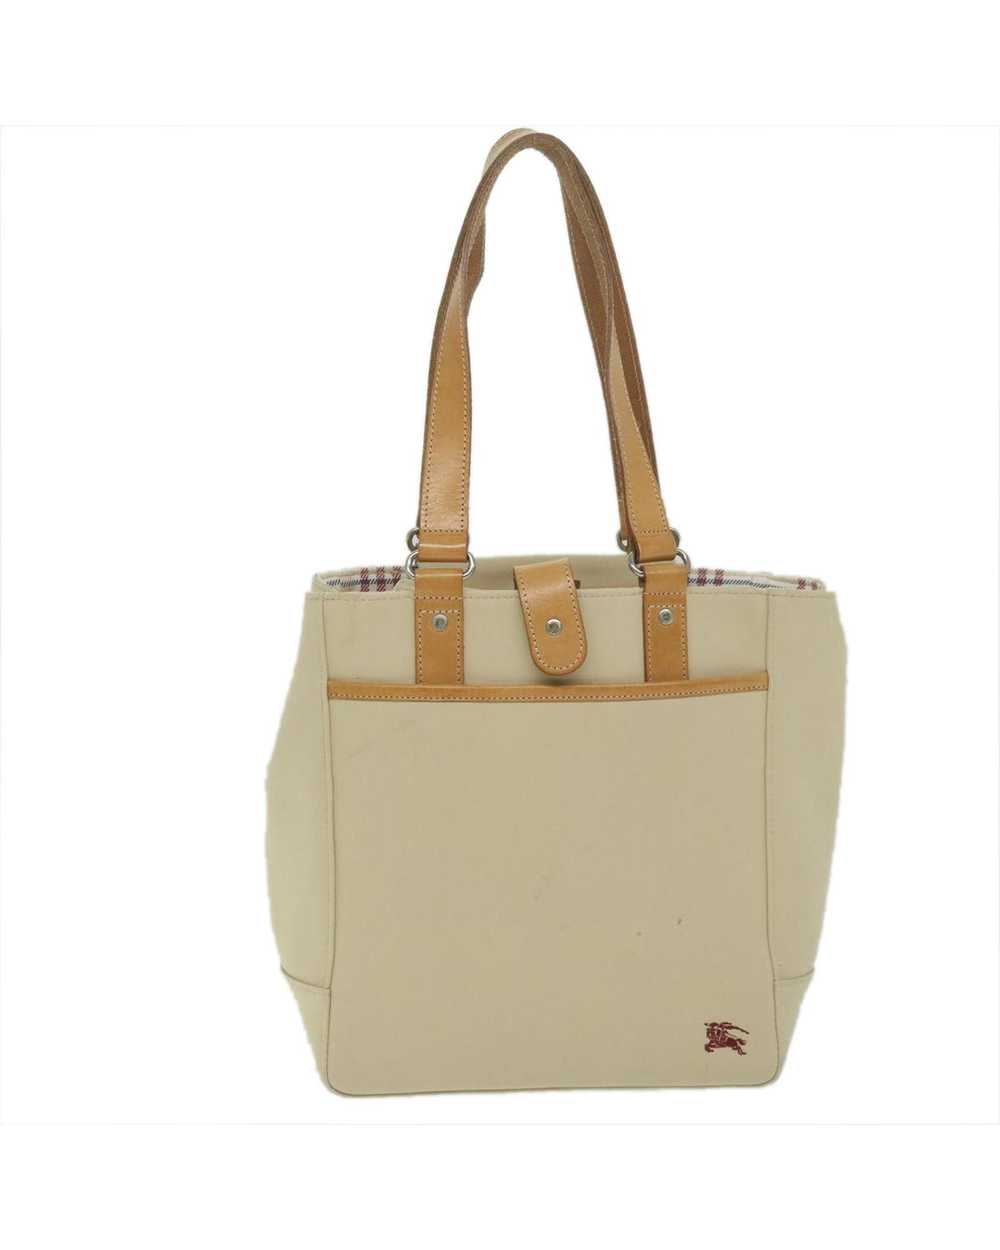 Burberry Classic Beige Canvas Tote Bag - image 2